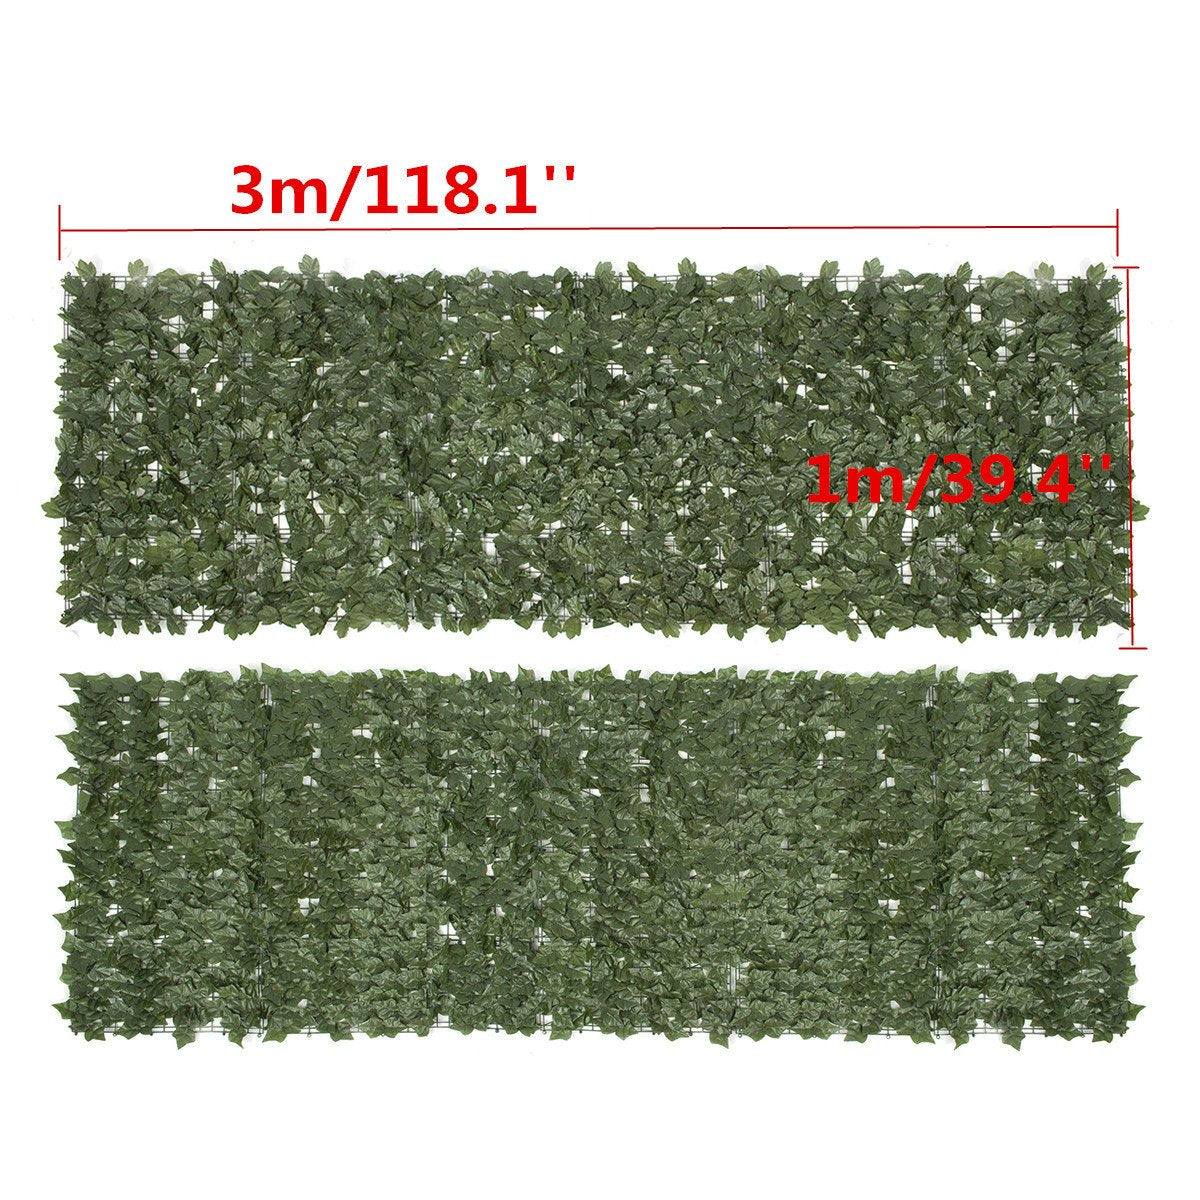 1*3m Artificial Ivy Leaf Fence Green Garden Yard Carpets Privacy Screen Hedge Plants Decorations